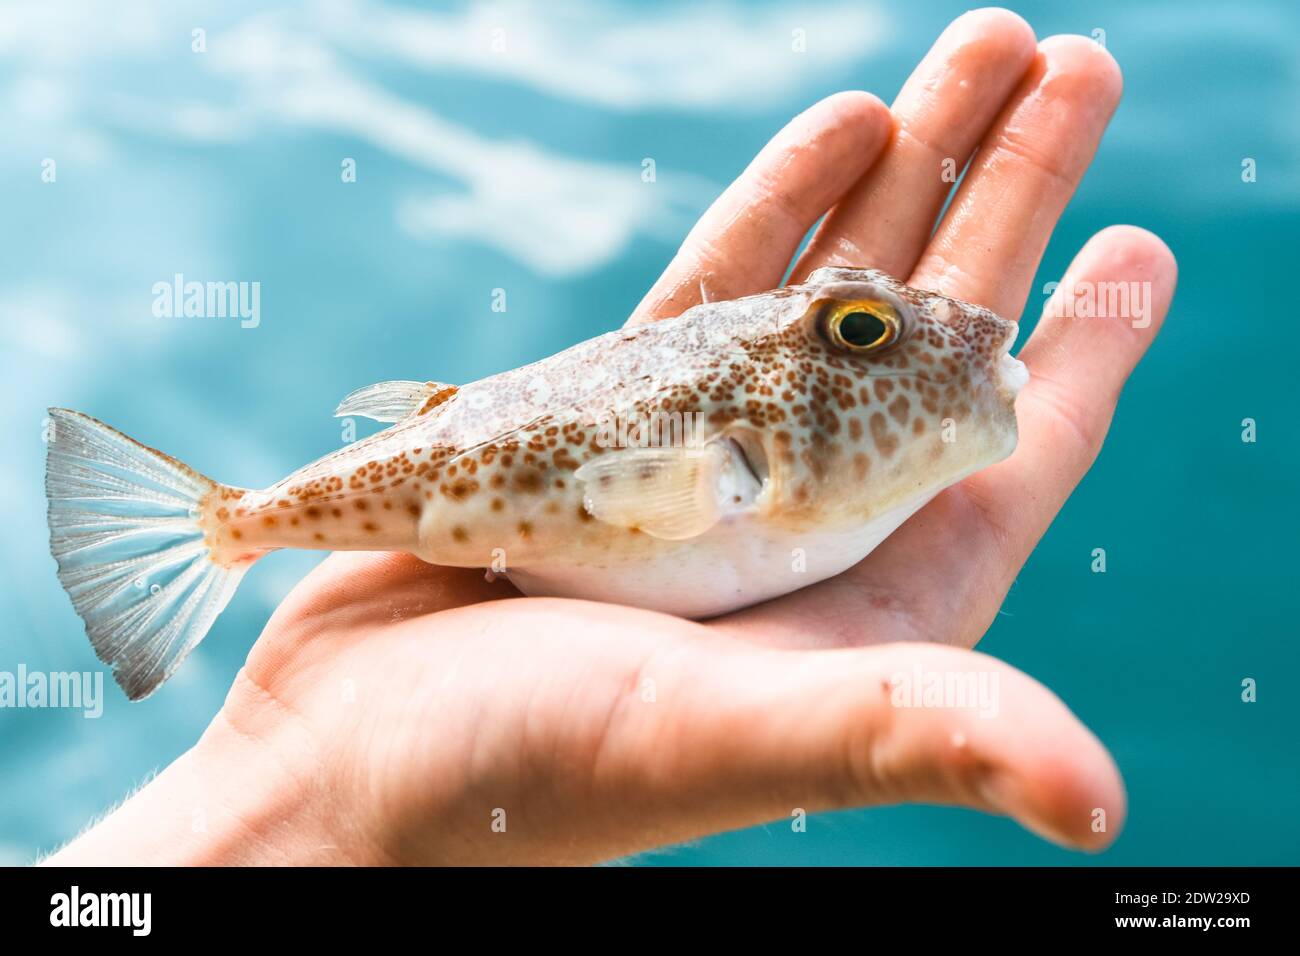 Poisonous puffer Fugu fish is lying on the palm of hand, Gulf of